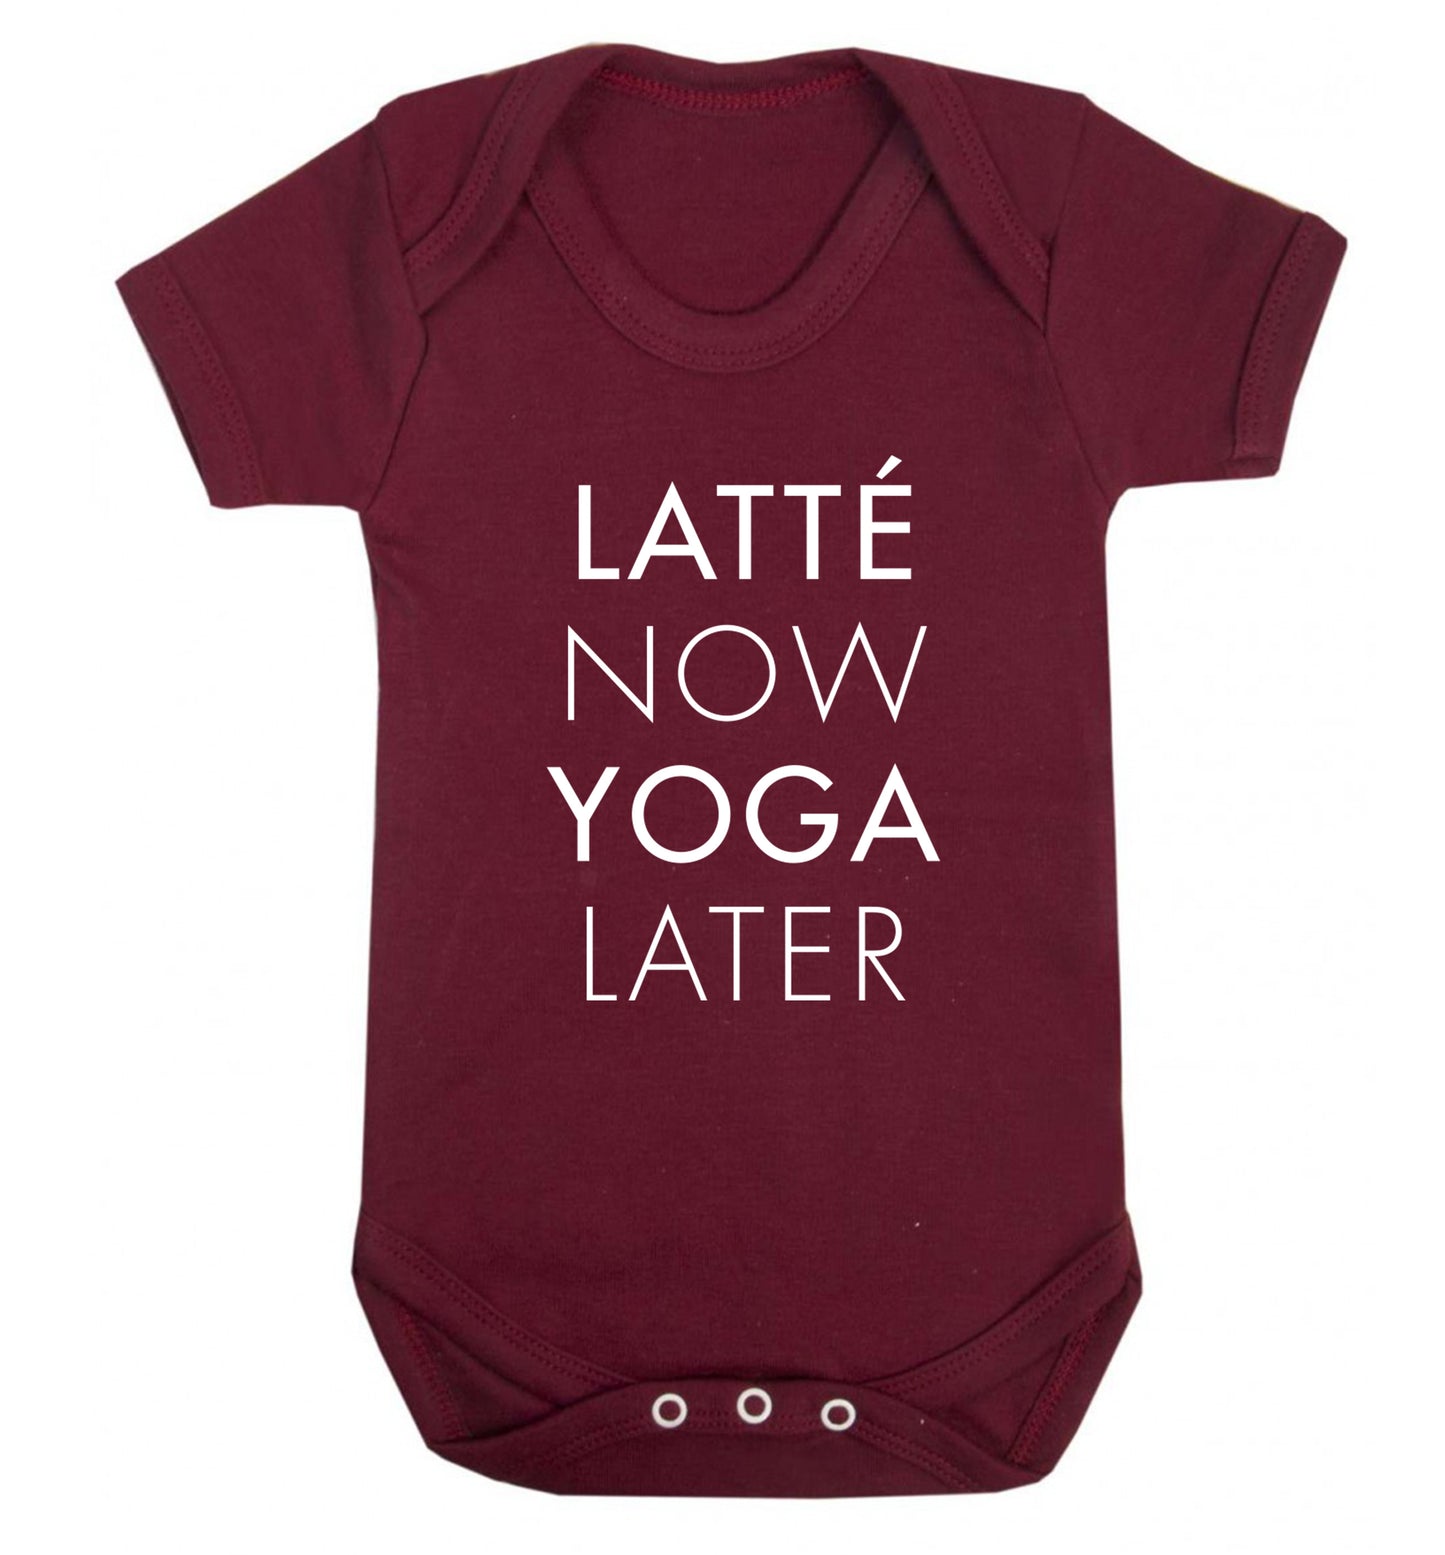 Latte now yoga later Baby Vest maroon 18-24 months